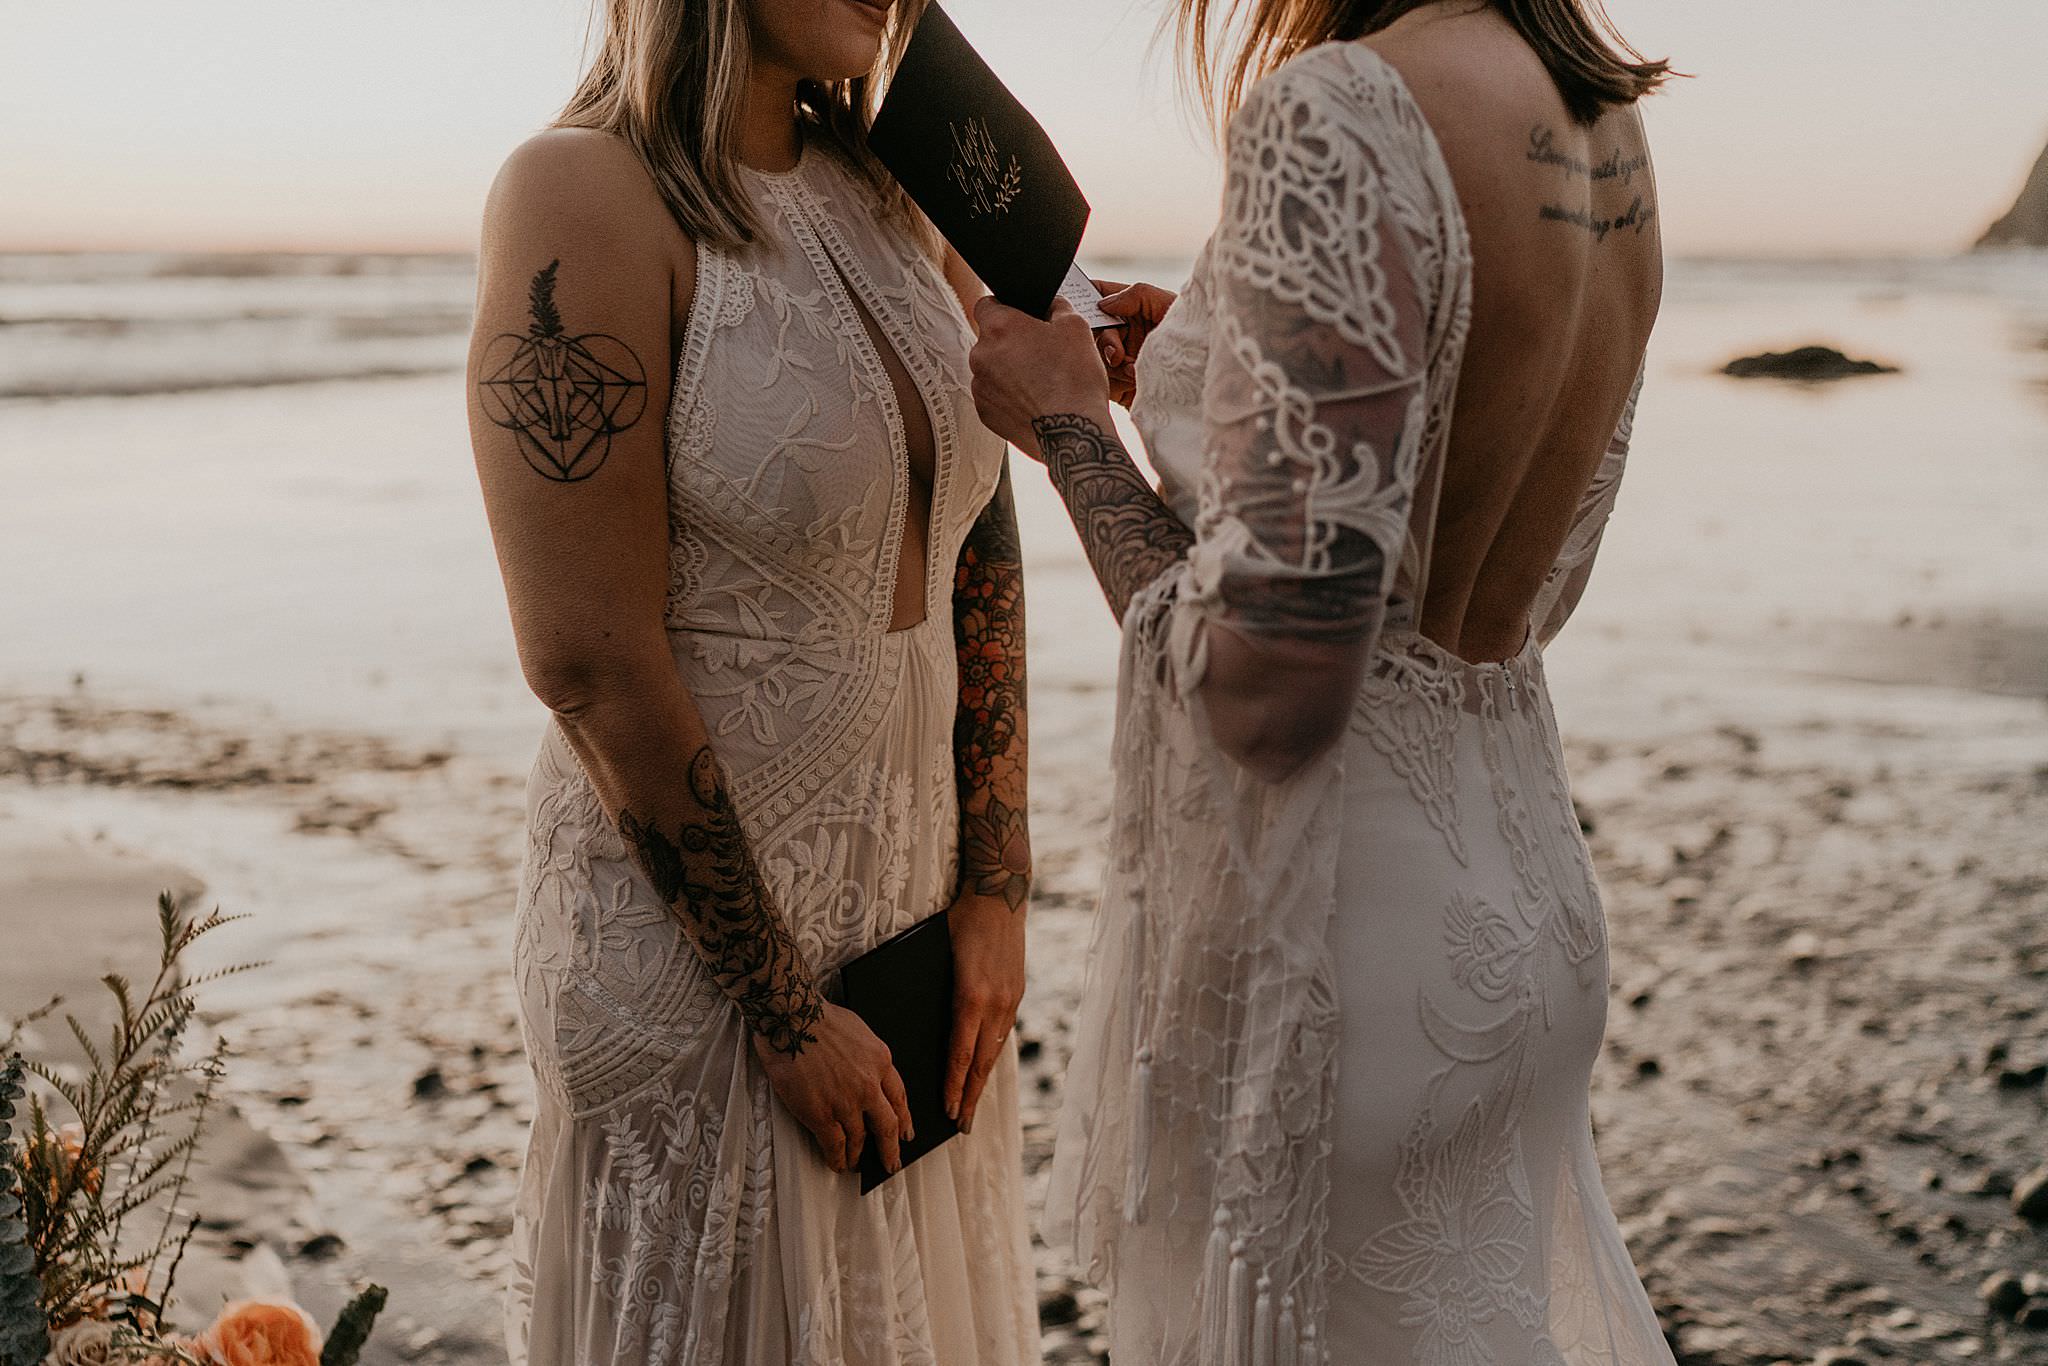 A pacific northwest wedding and vow renewal at Ruby Beach Olympic National Park as seen on junebug weddings